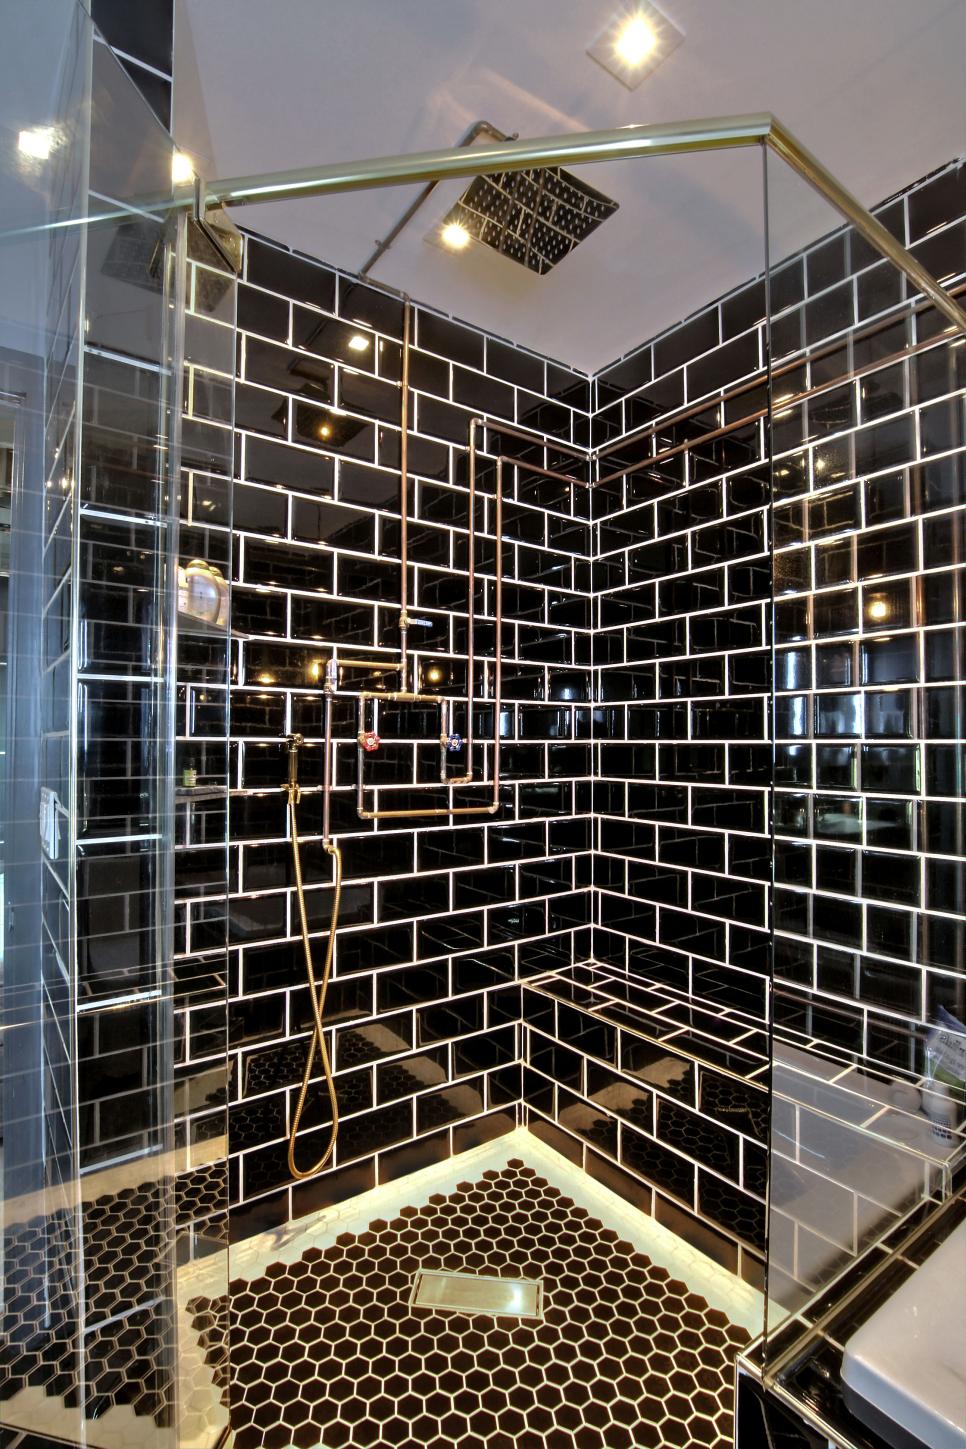 Black Tile Shower With Exposed Copper Pipes Creates Steampunk Style | HGTV